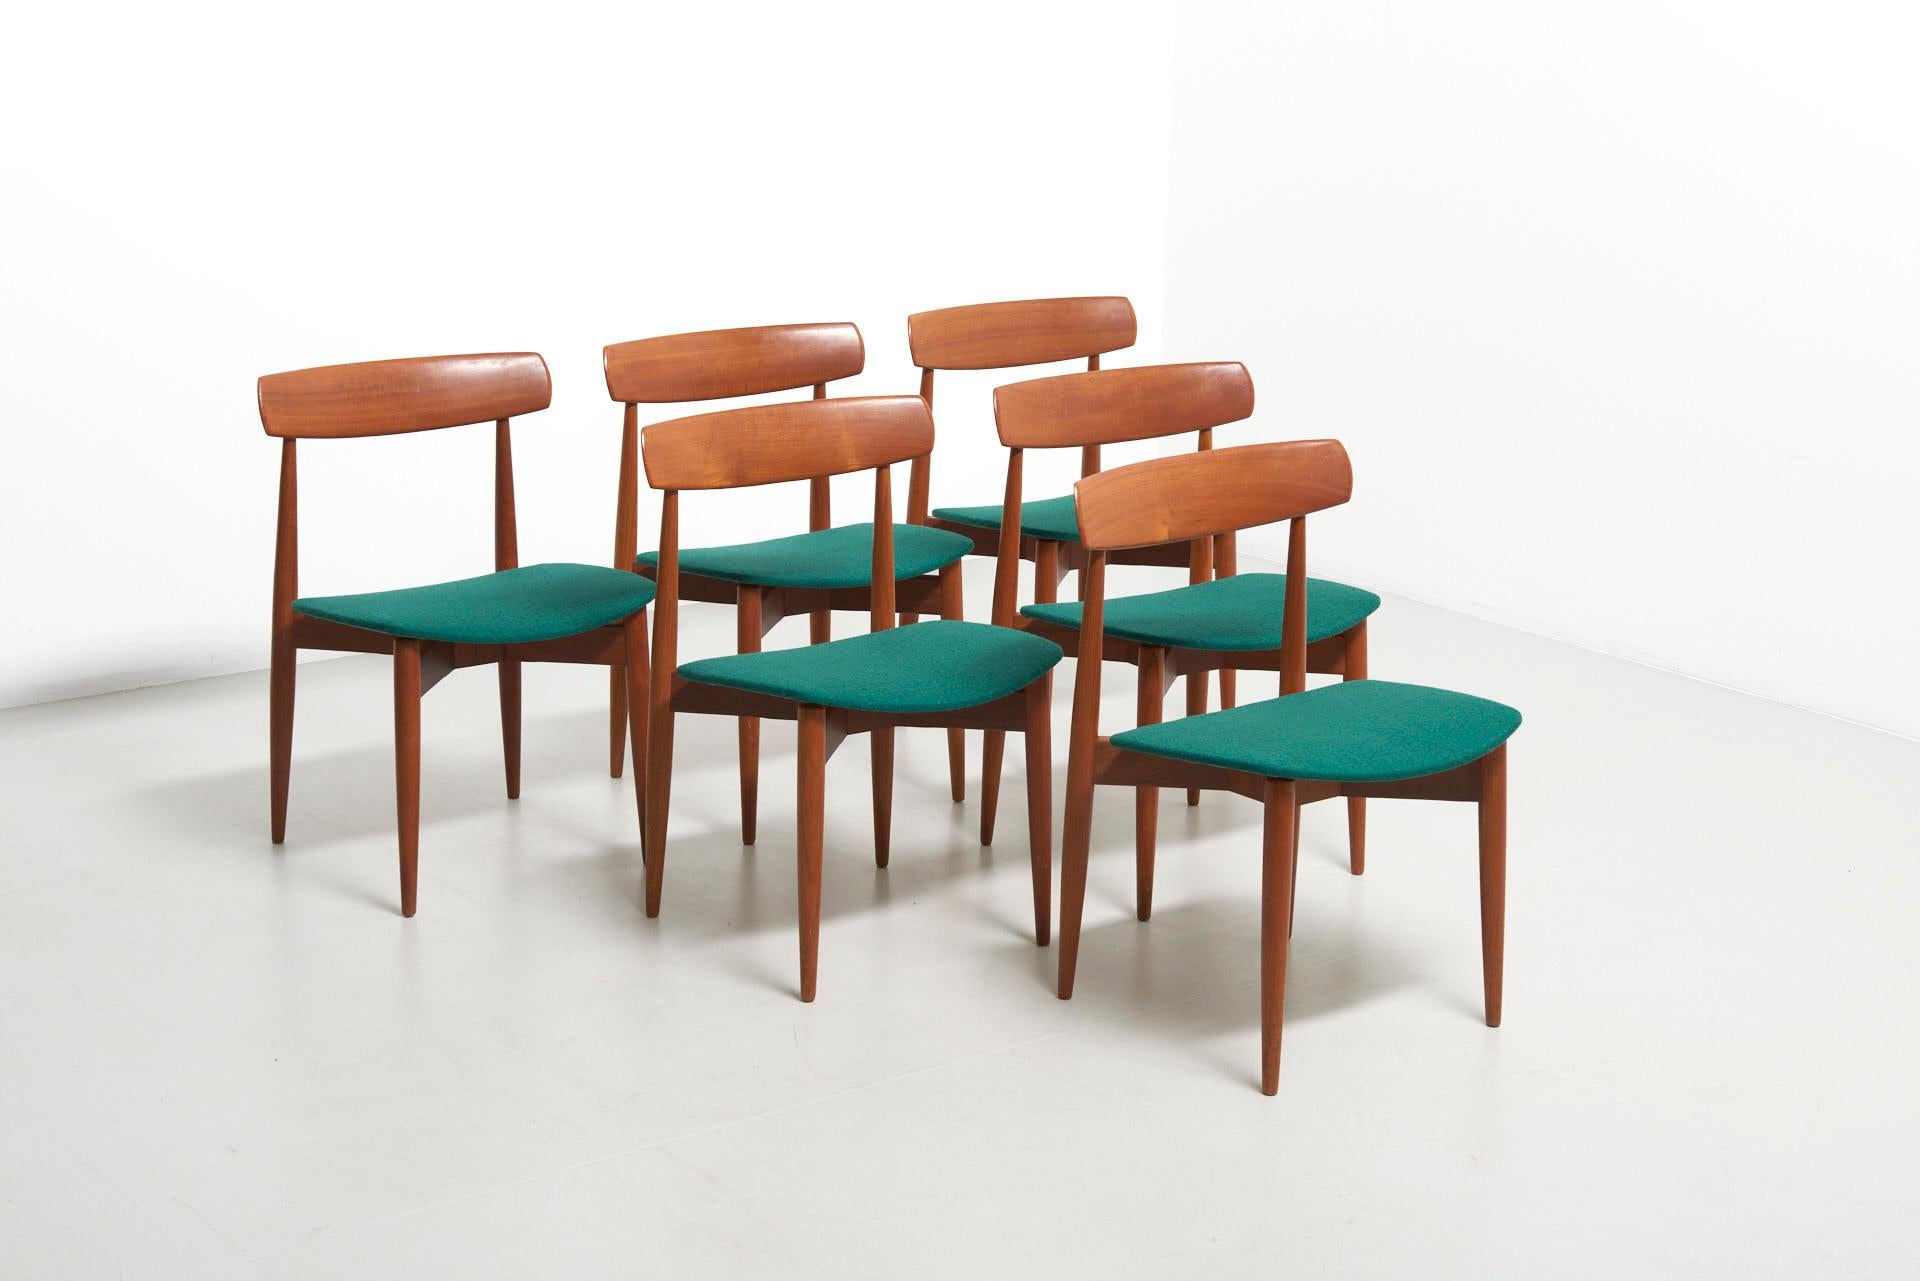 A set of 6 solid teak dining chairs by H.W. Klein for Bramin. Completely restored and reupholstered in green Tonica Kvadrat fabric.